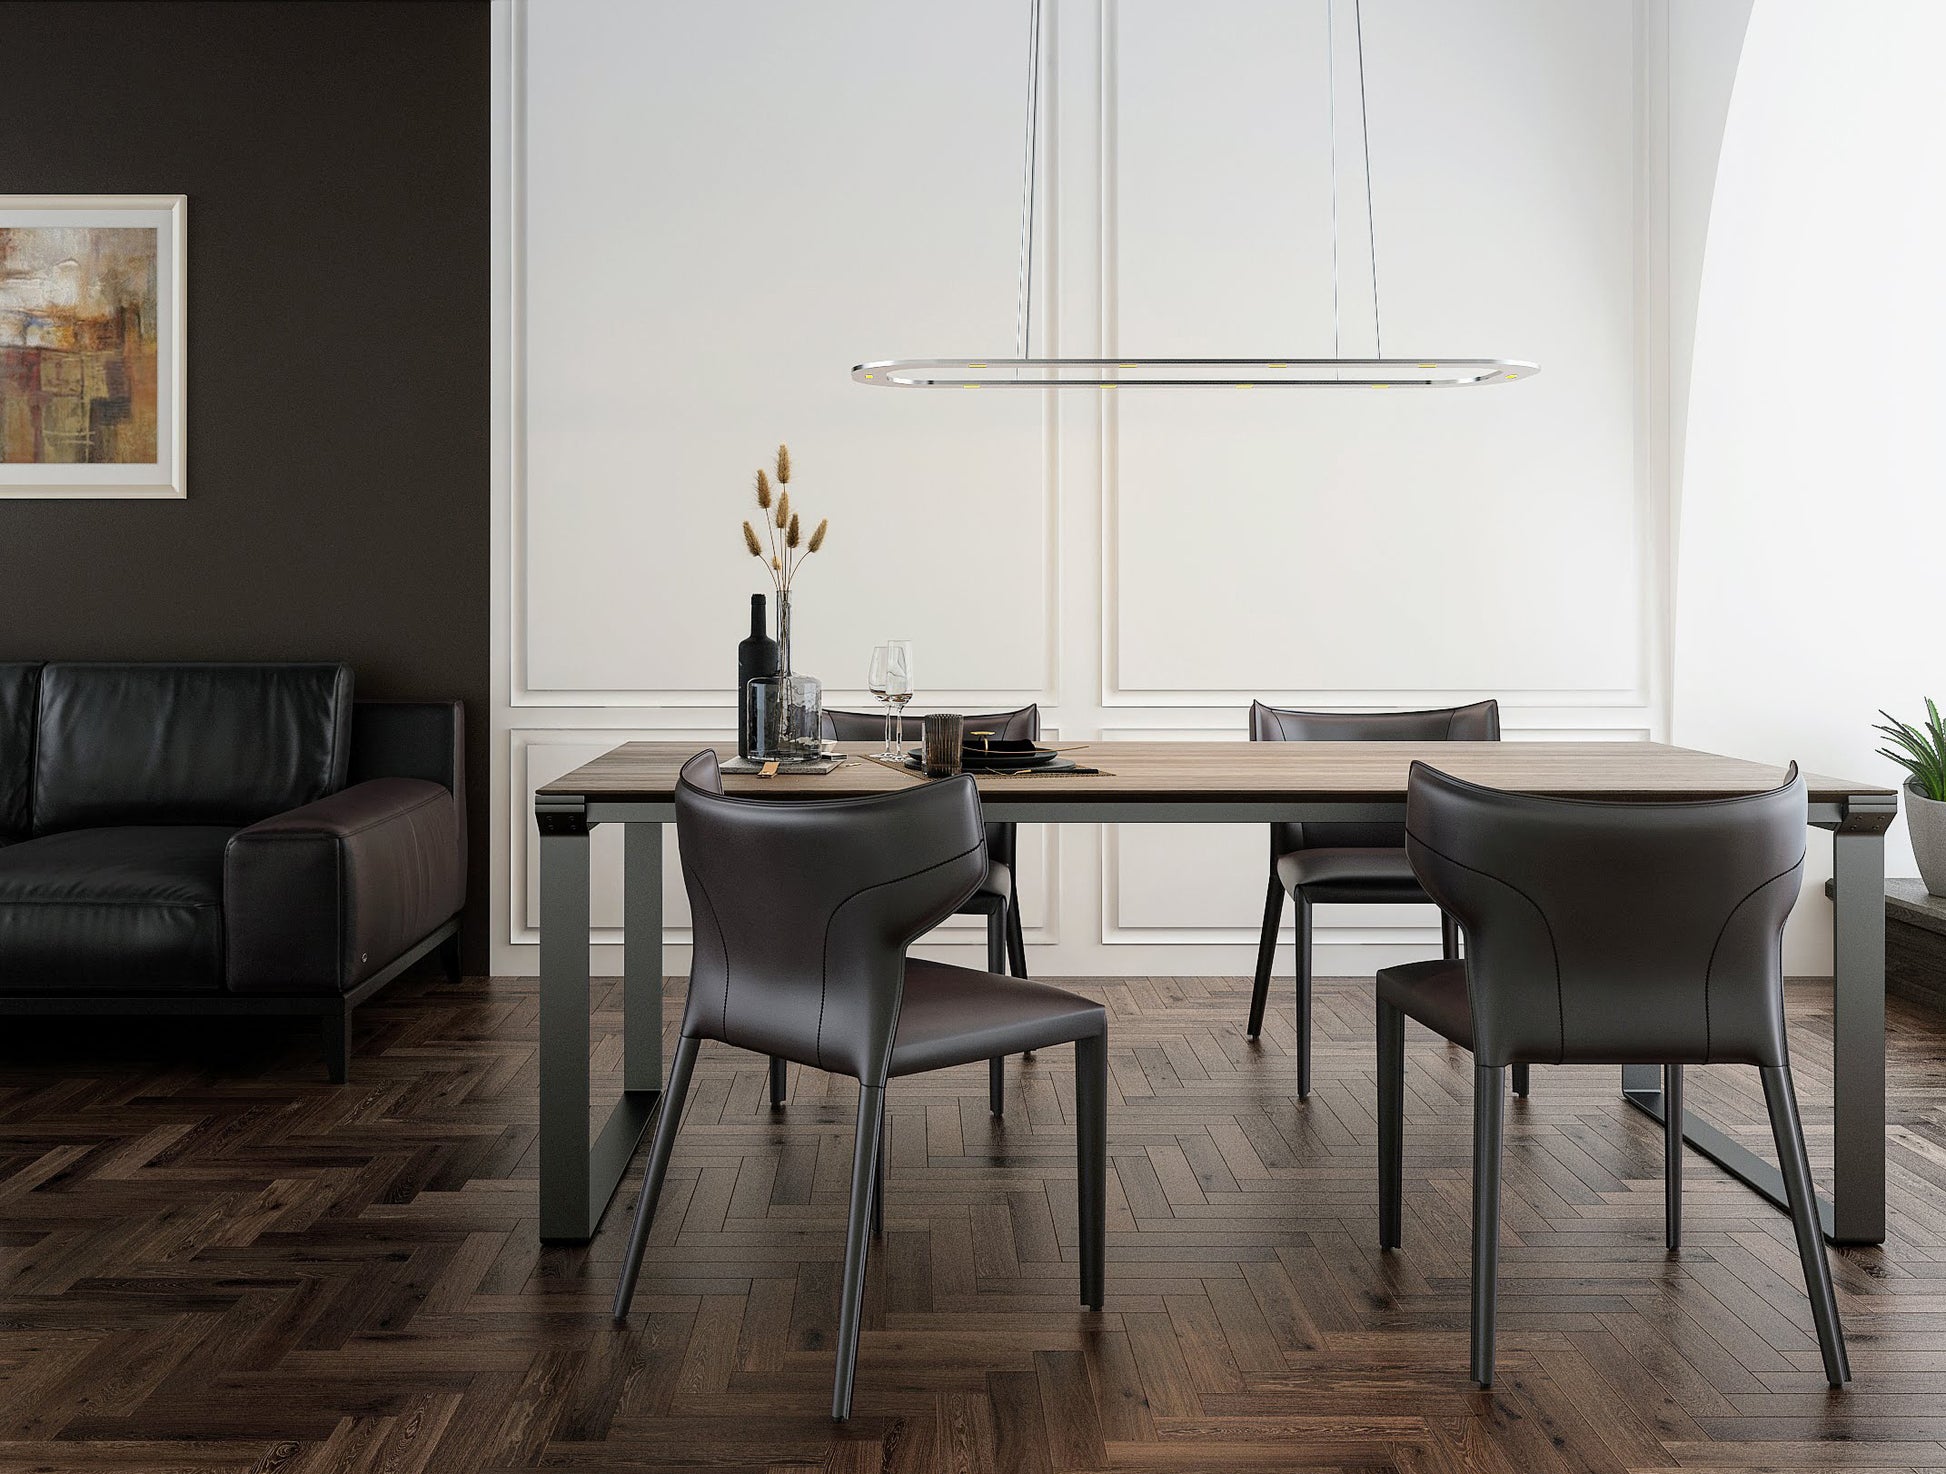 Byok Piani Lungo Pendent Lamp in high gloss polished finish over a dining table in a modern setting